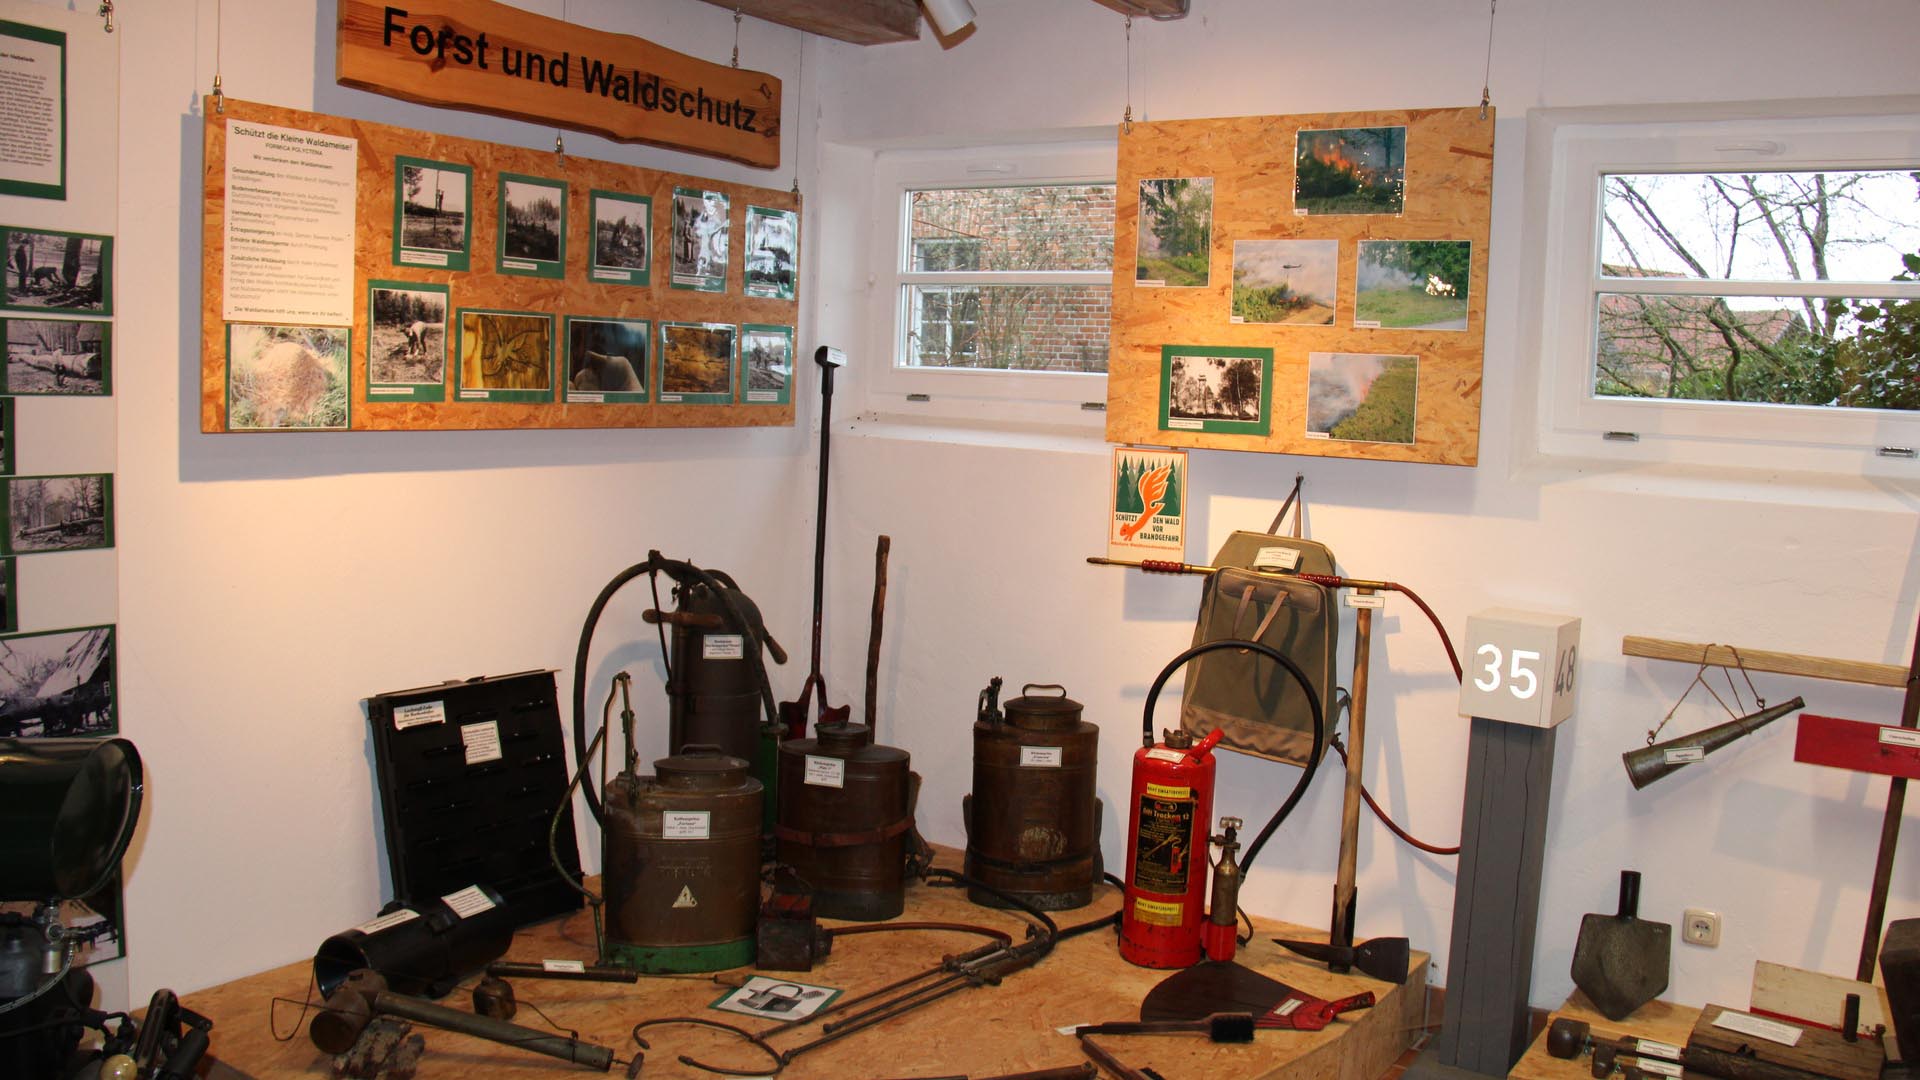 Forestry Work Museum